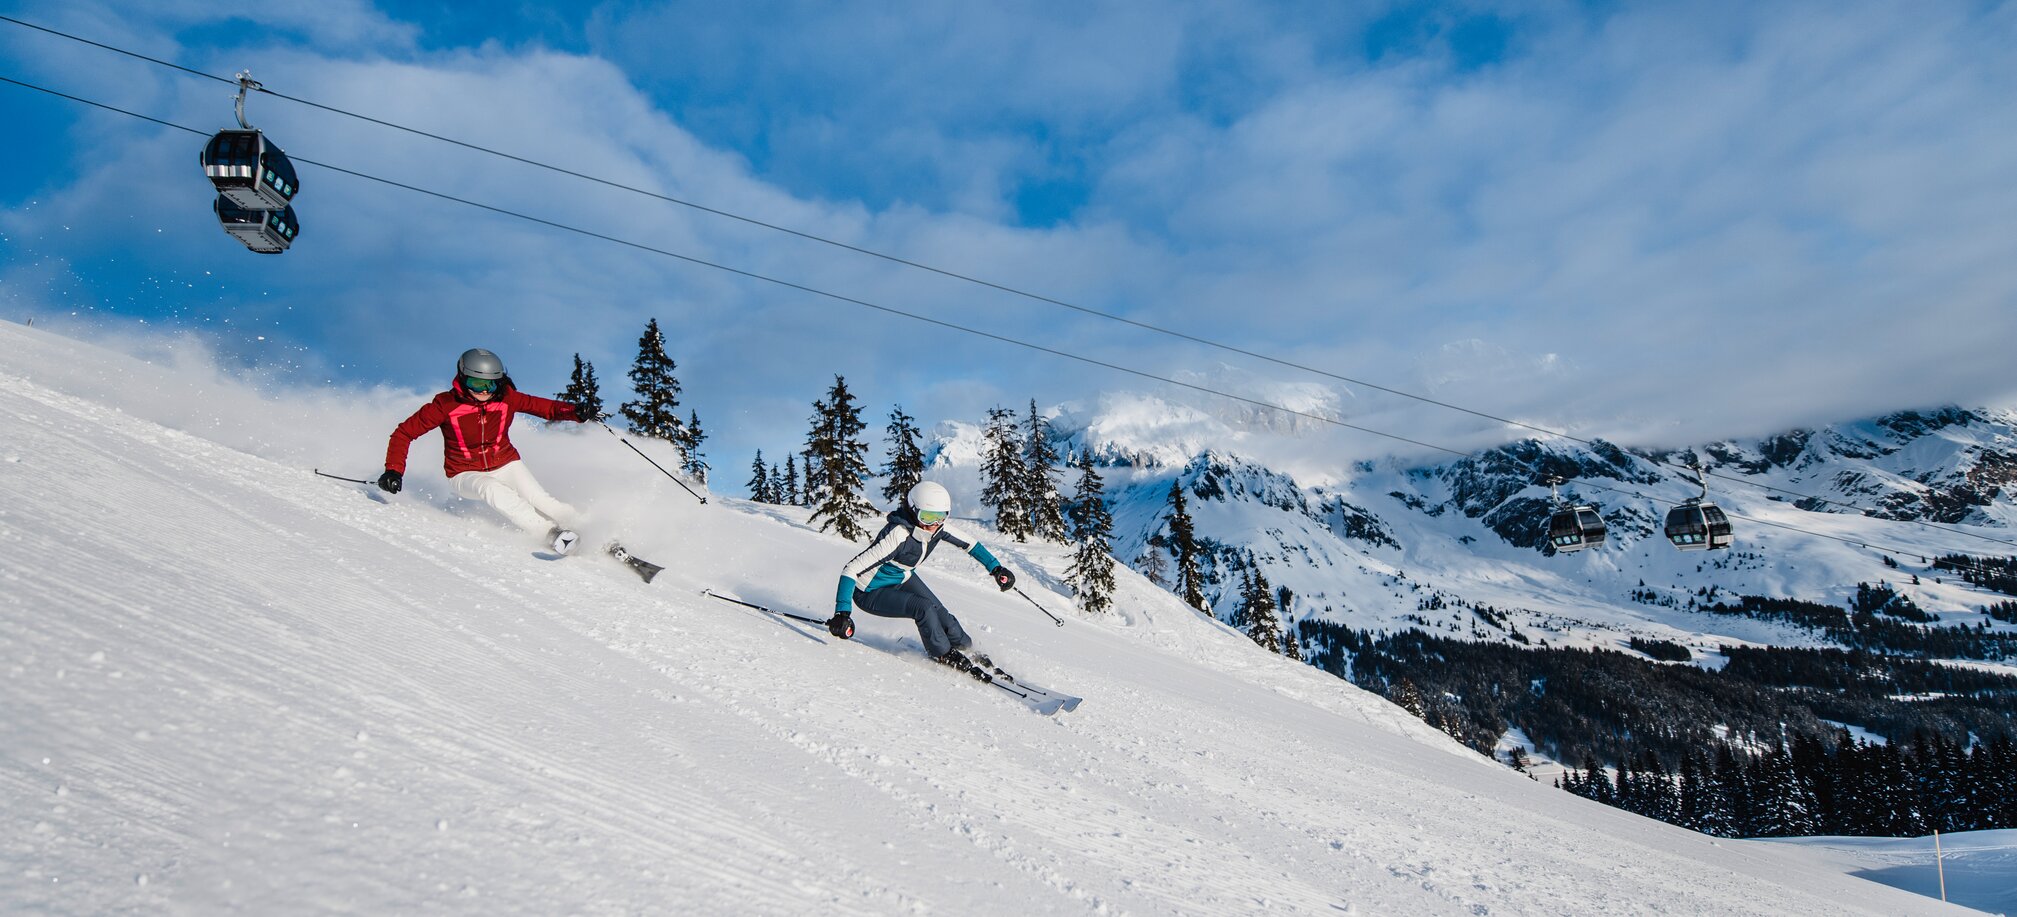 Fun and great conditions on the perfectly groomed slopes in Ski amadé